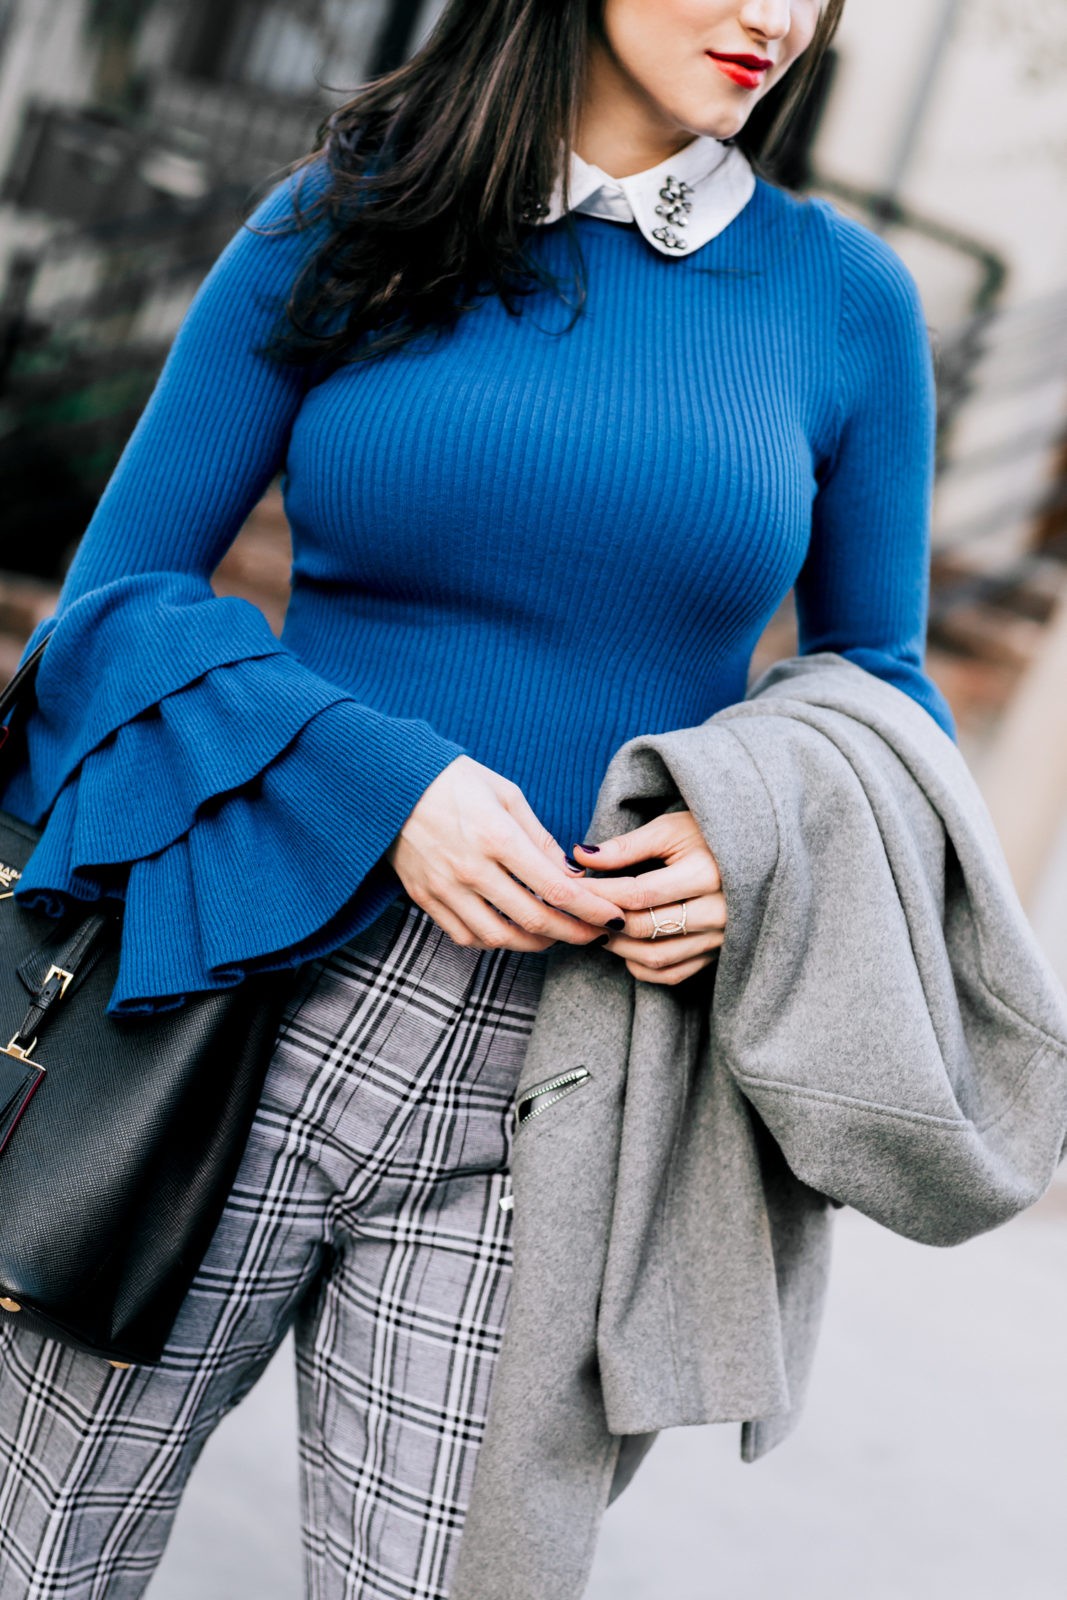 How to Style Winter Layers by Los Angeles Fashion Blogger Laura Lily,